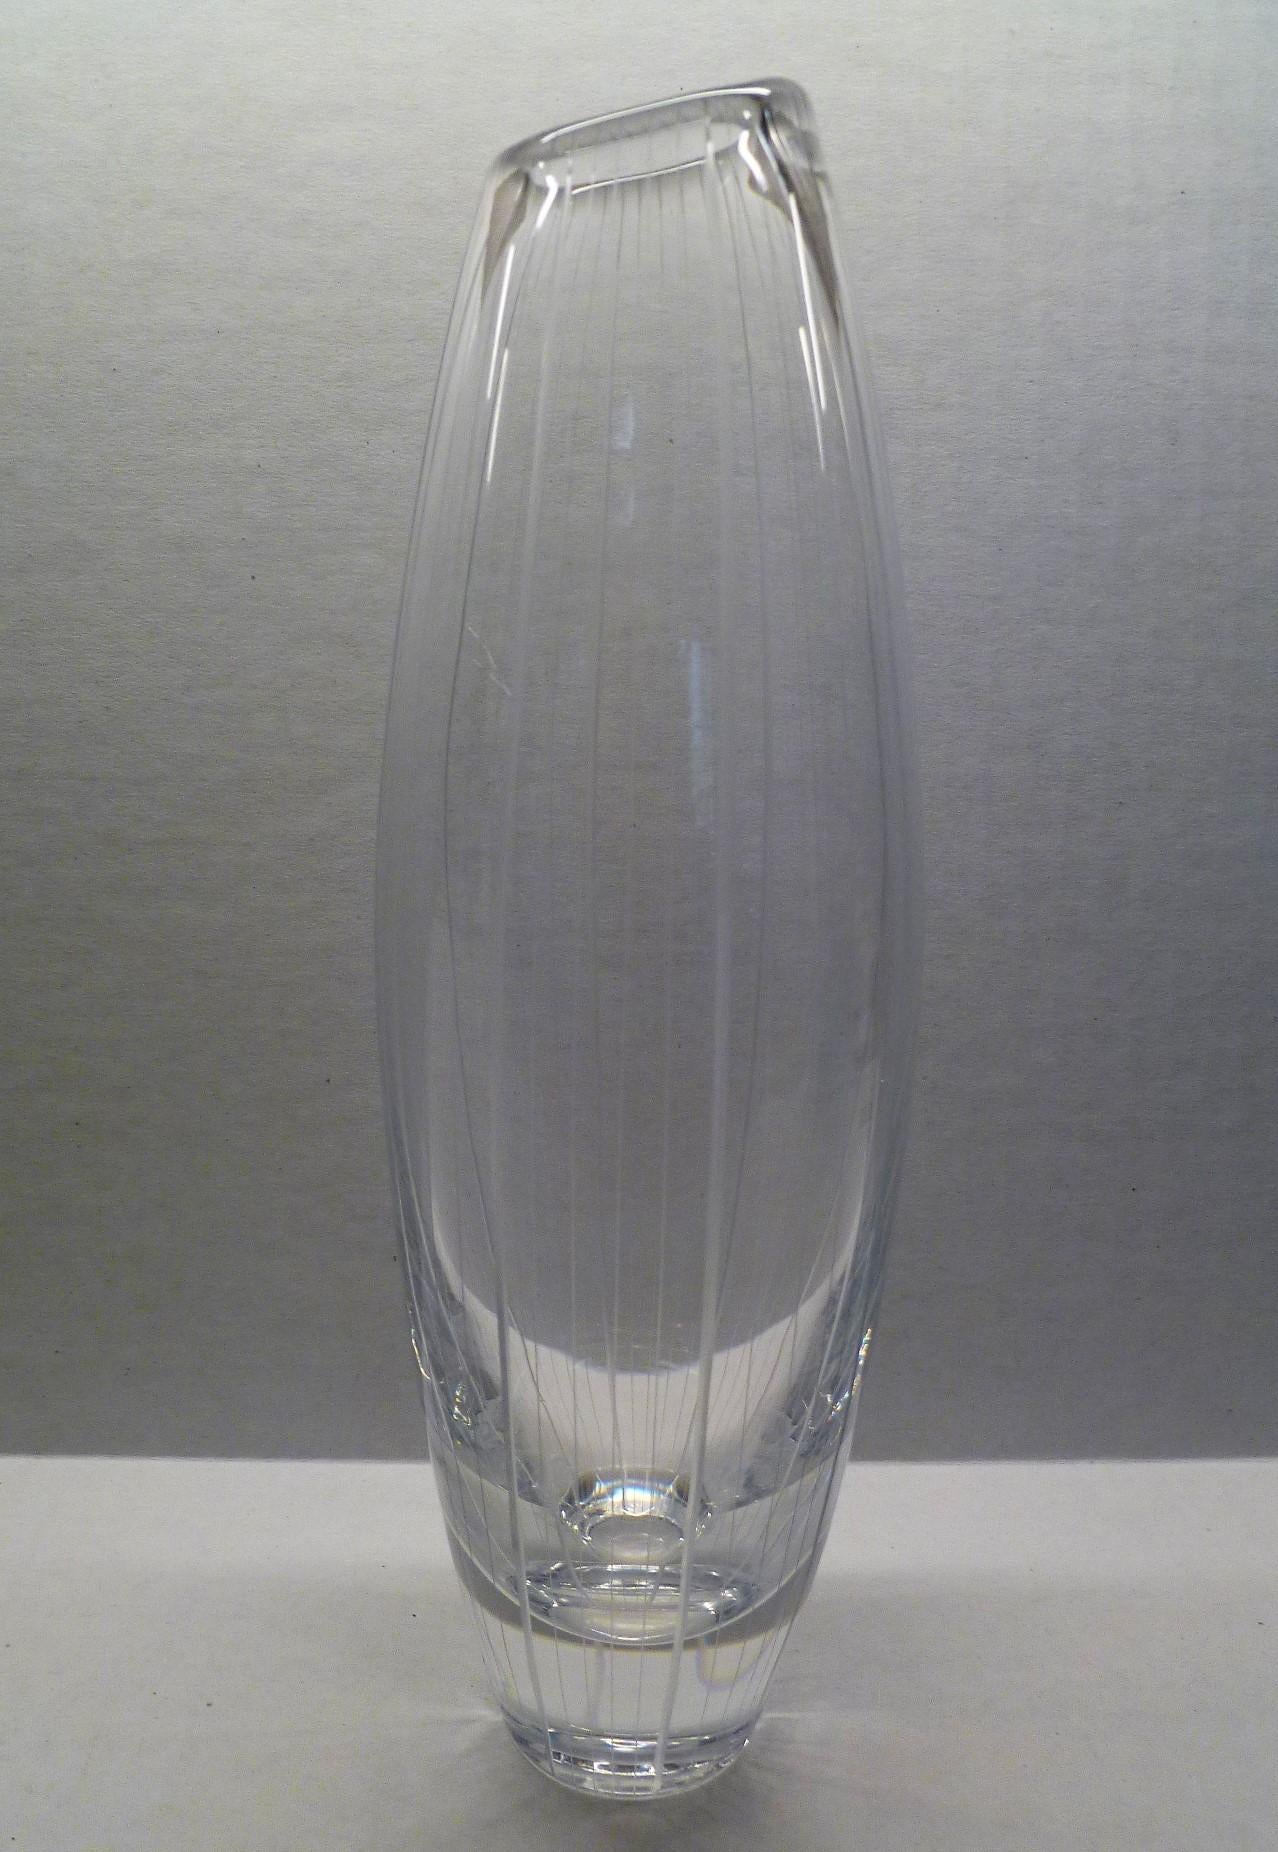 Mid-20th Century Midcentury Kosta, Sweden Stripped Modern Glass Vase by Vicke Lindstrand, 1956 For Sale